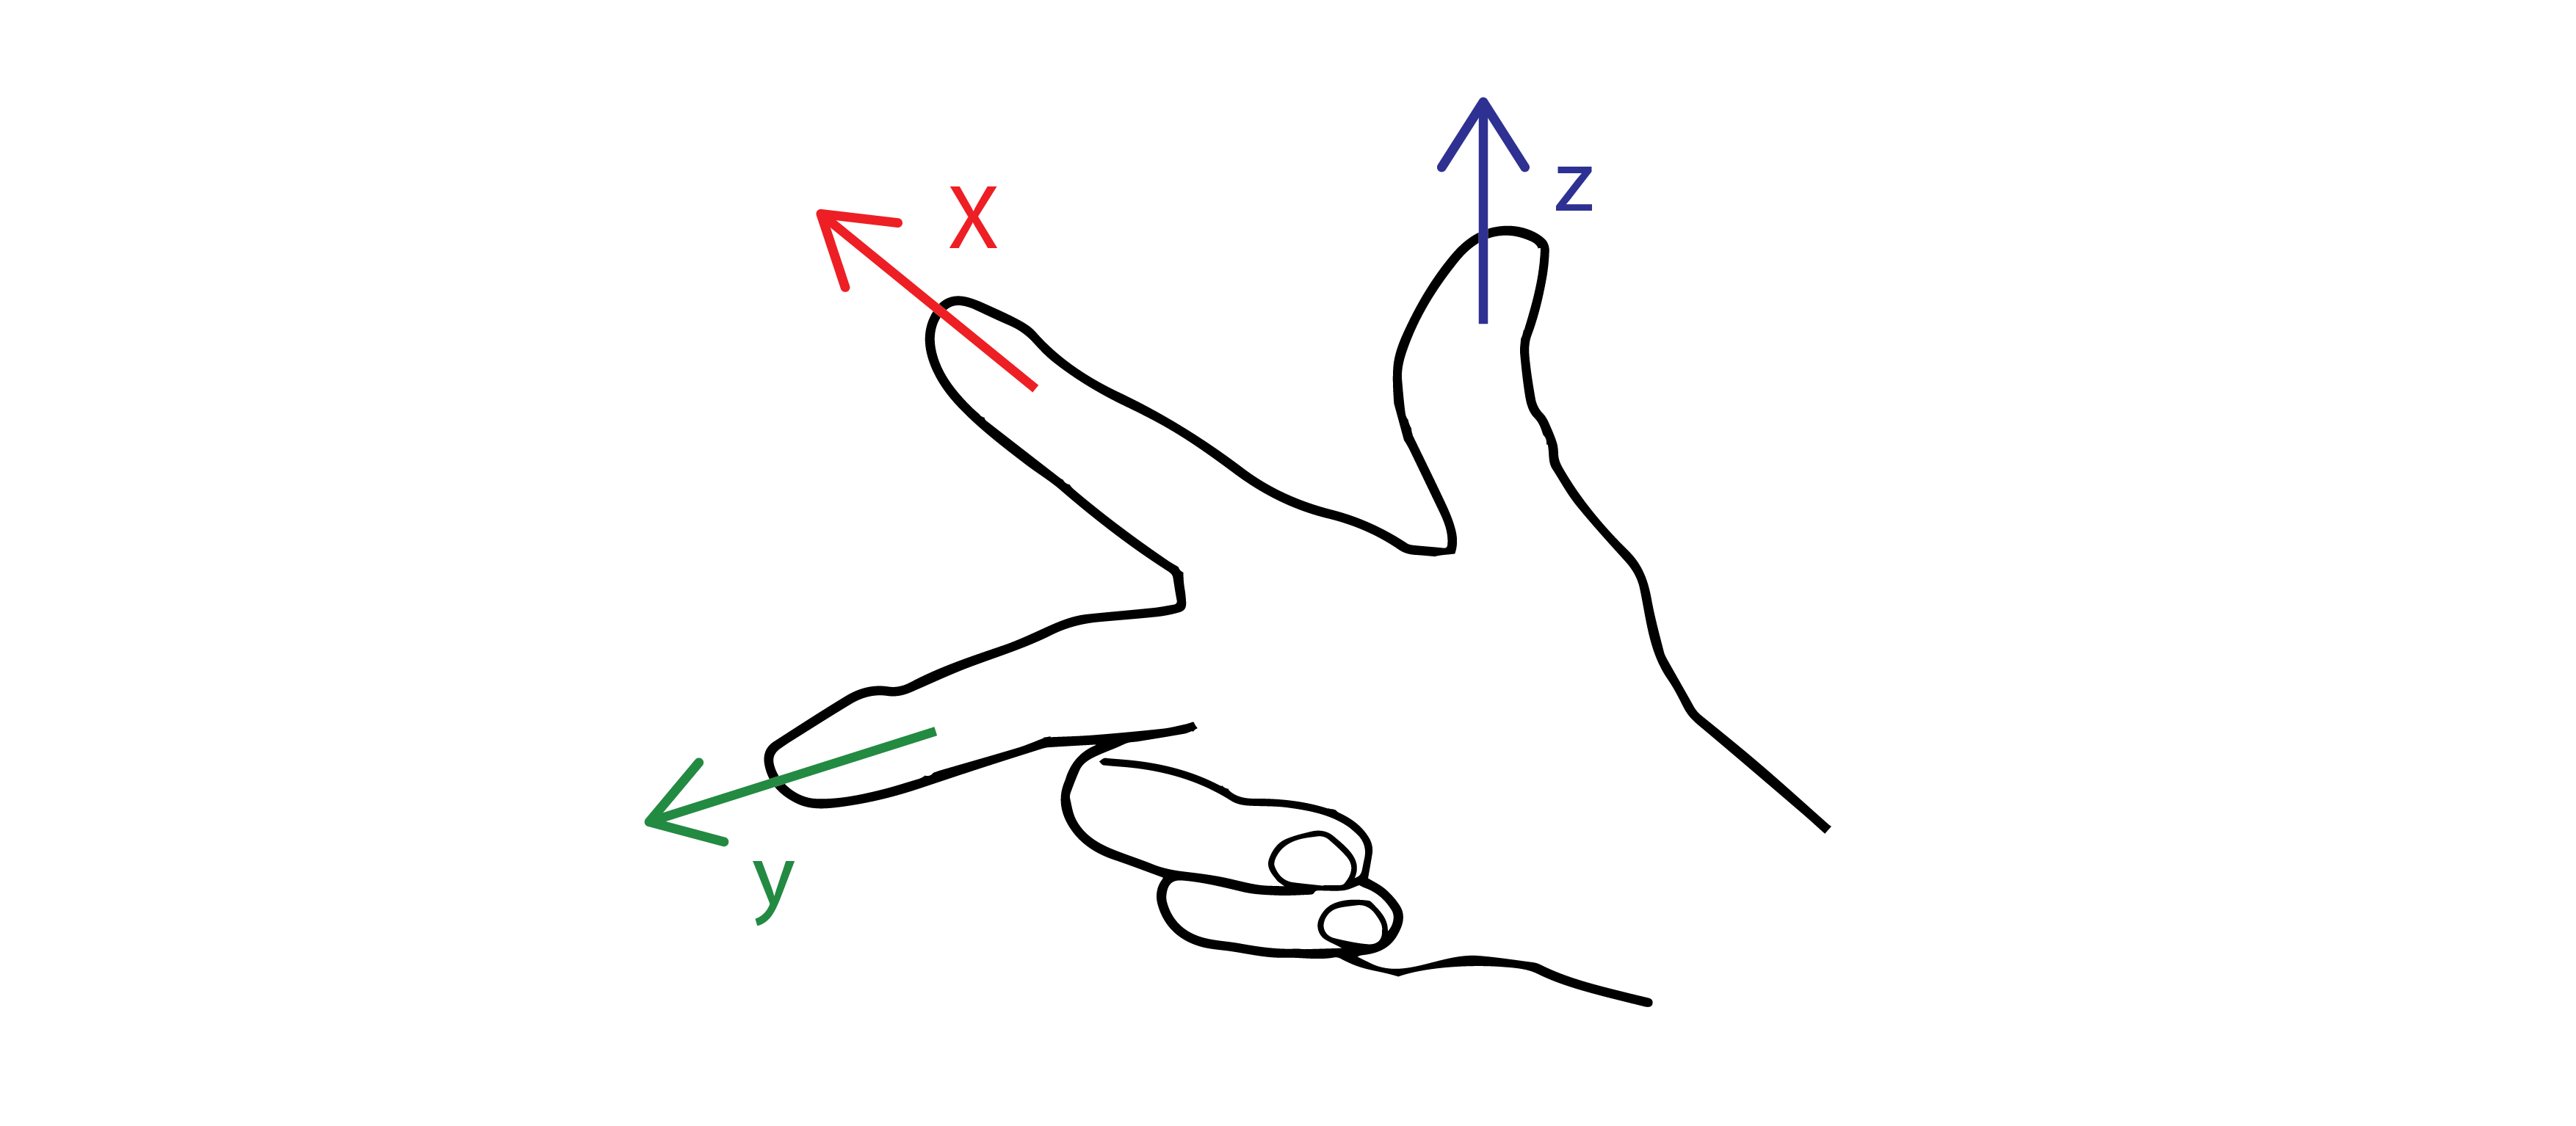 Right hand rule